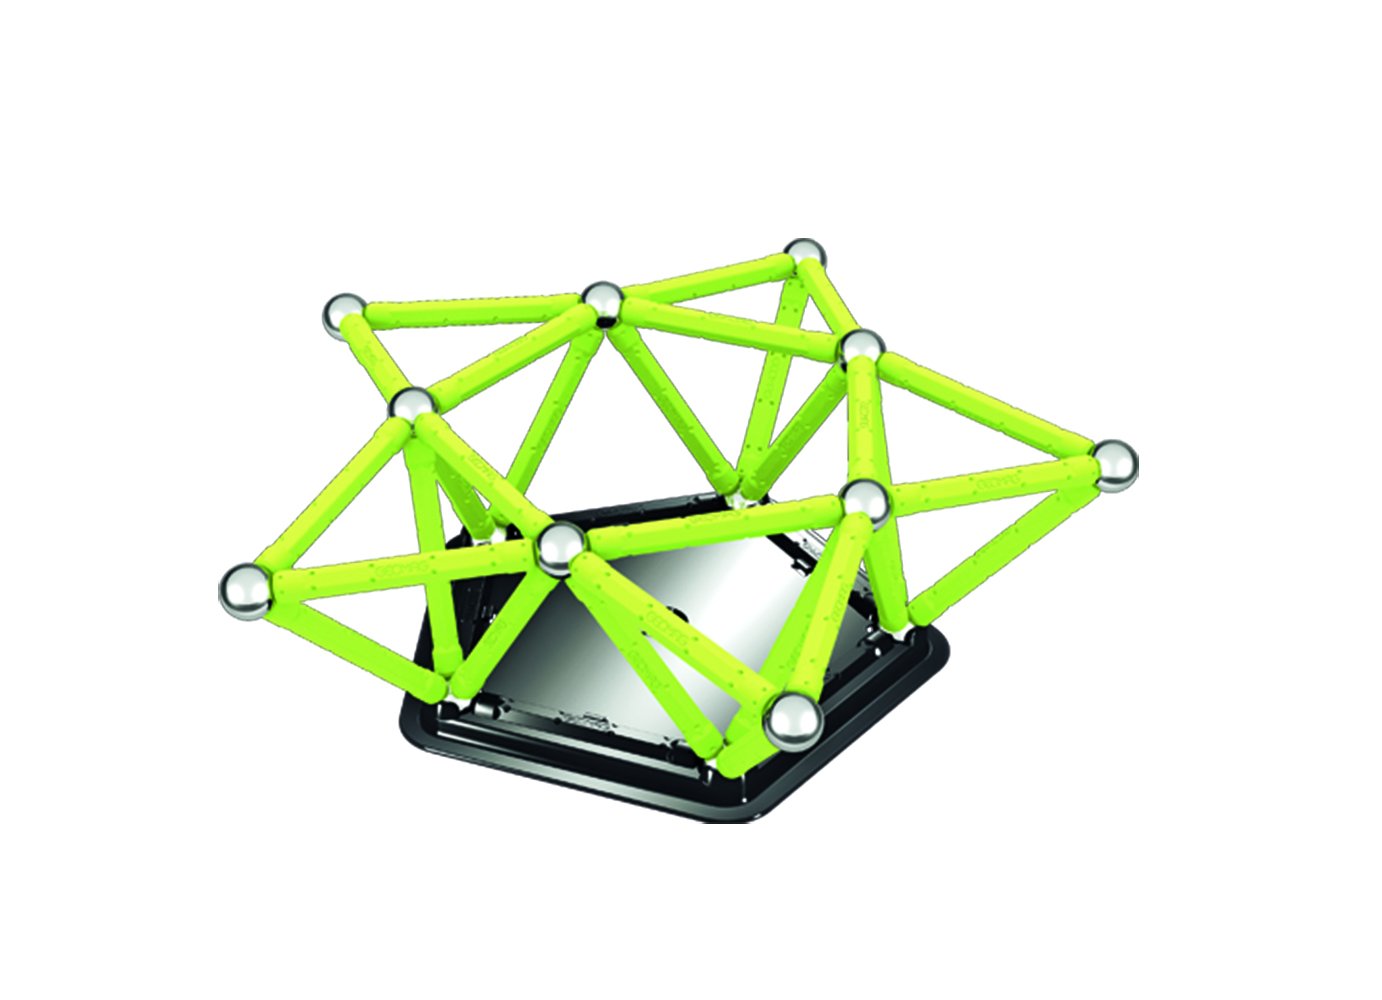 Joc 64 piese - Glow Magnetic Construction | Geomag - 6